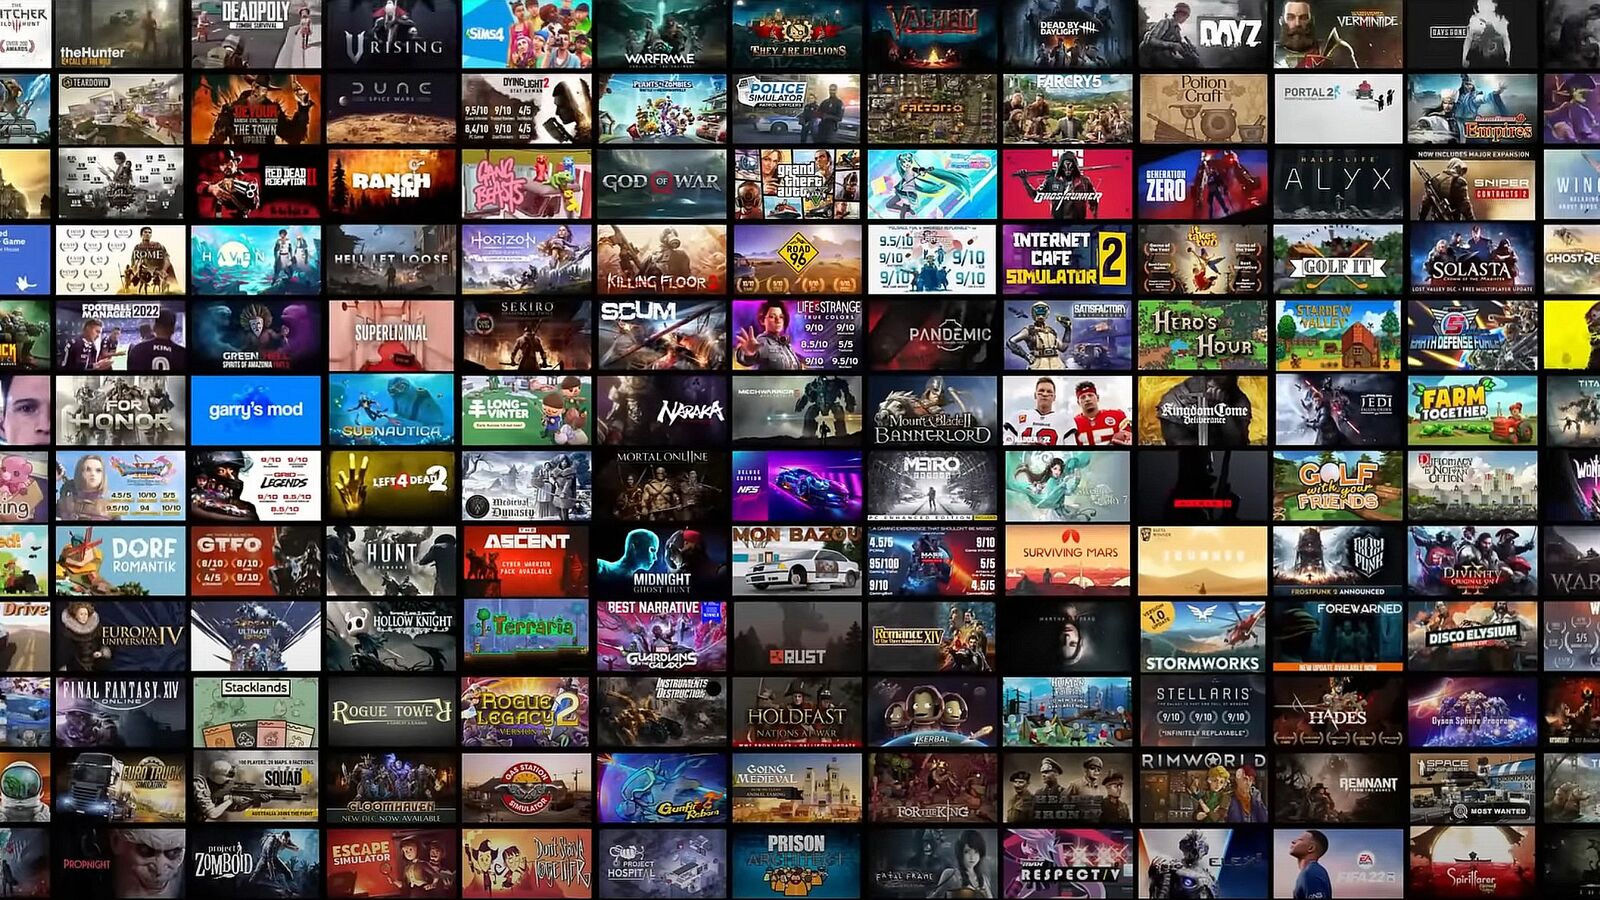 Valve Announces Steam Summer Sale To Kick Off On June 23rd